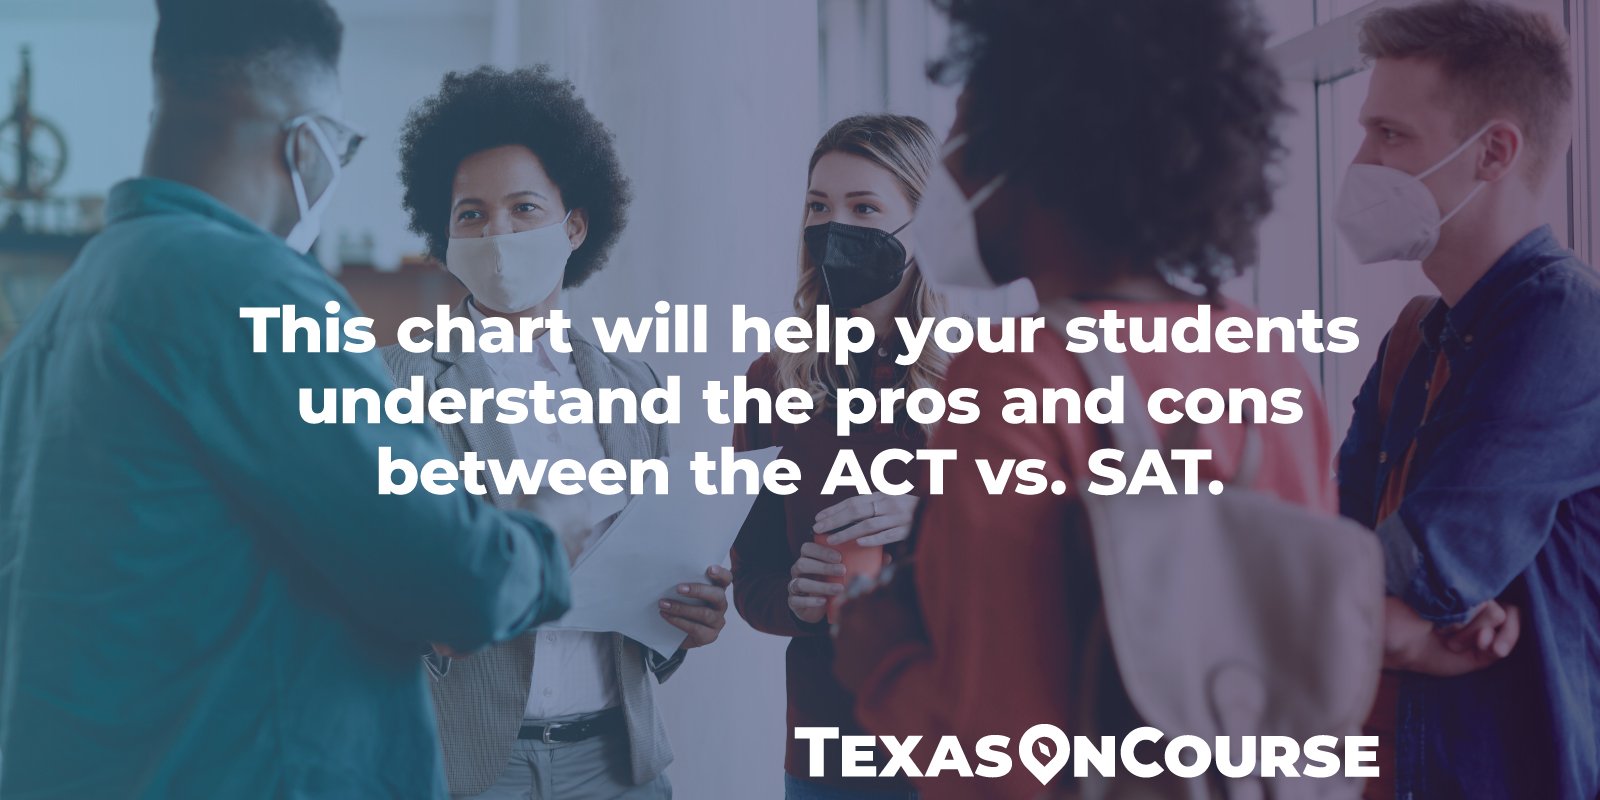 This chart will help your students understand the pros and cons between the ACT vs. SAT.